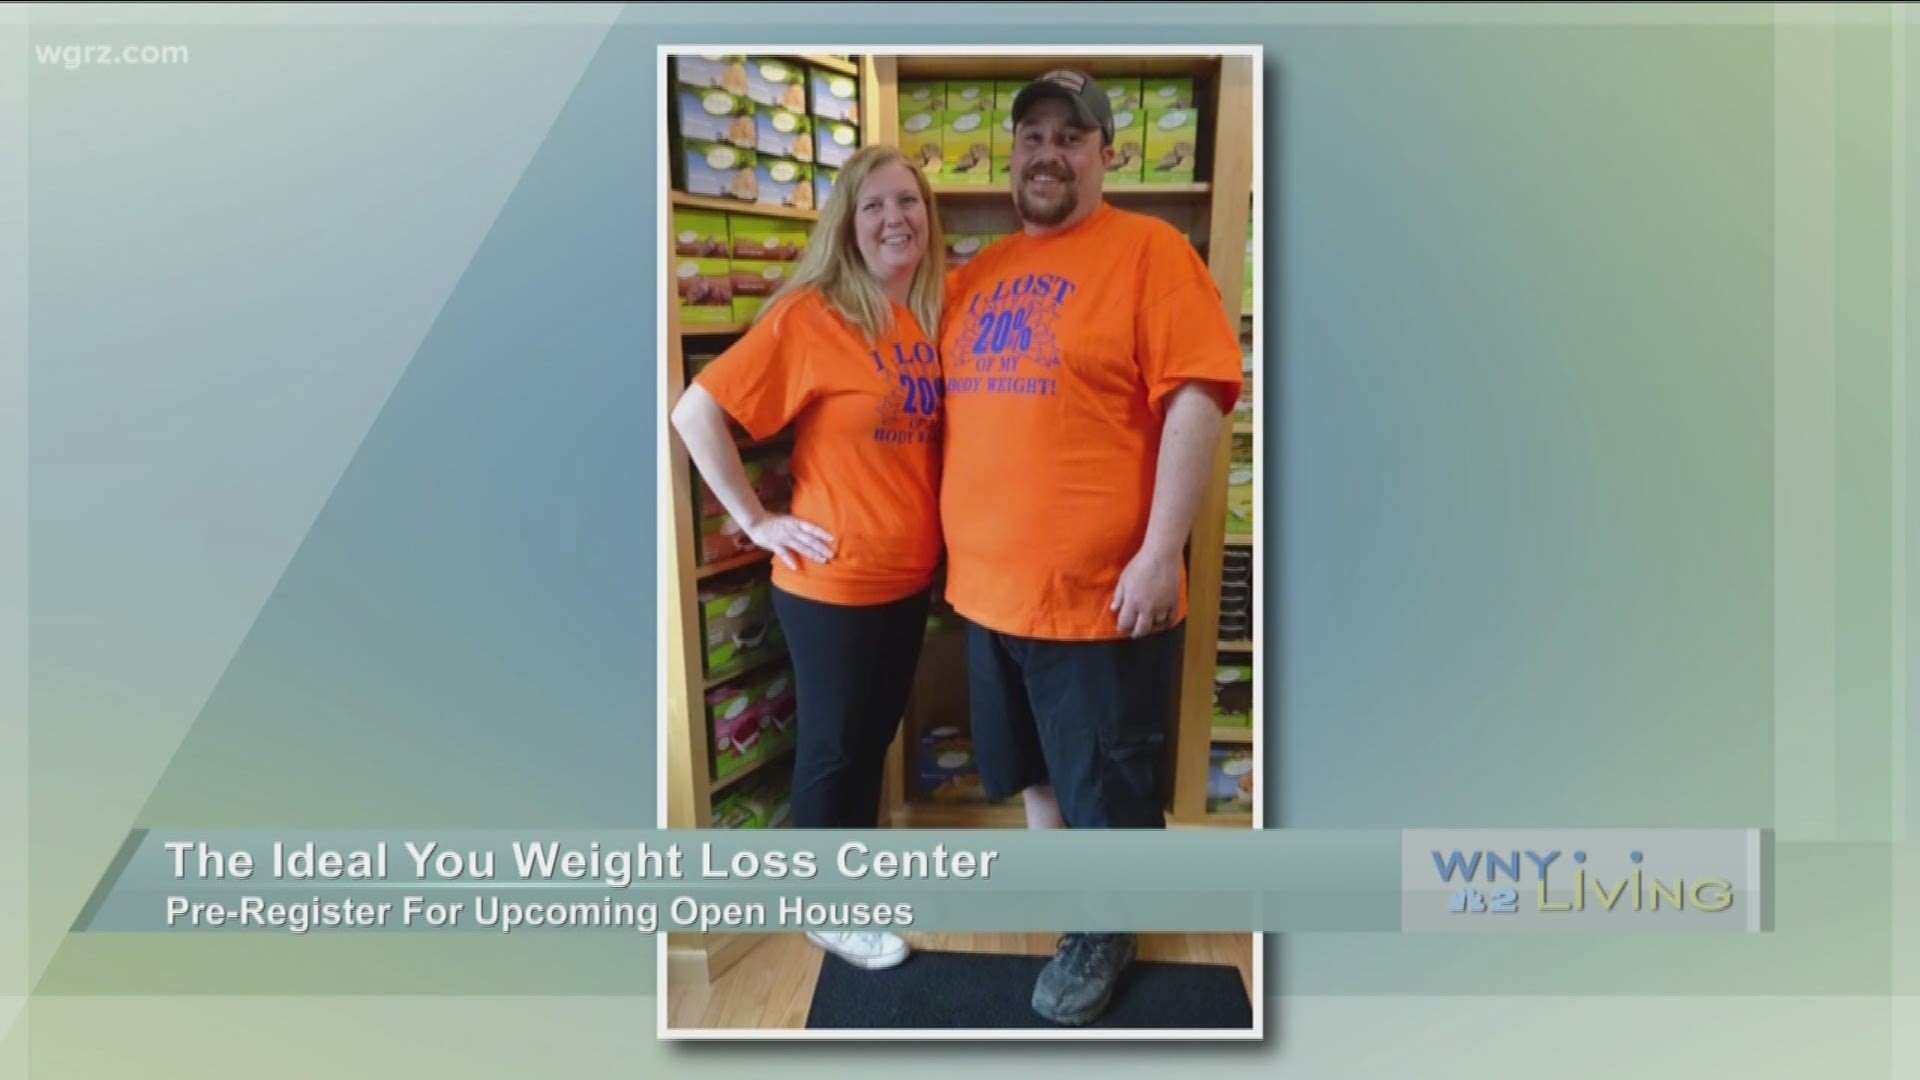 WNY Living - June 1 - The Ideal You Weight Loss Center (SPONSORED CONTENT)